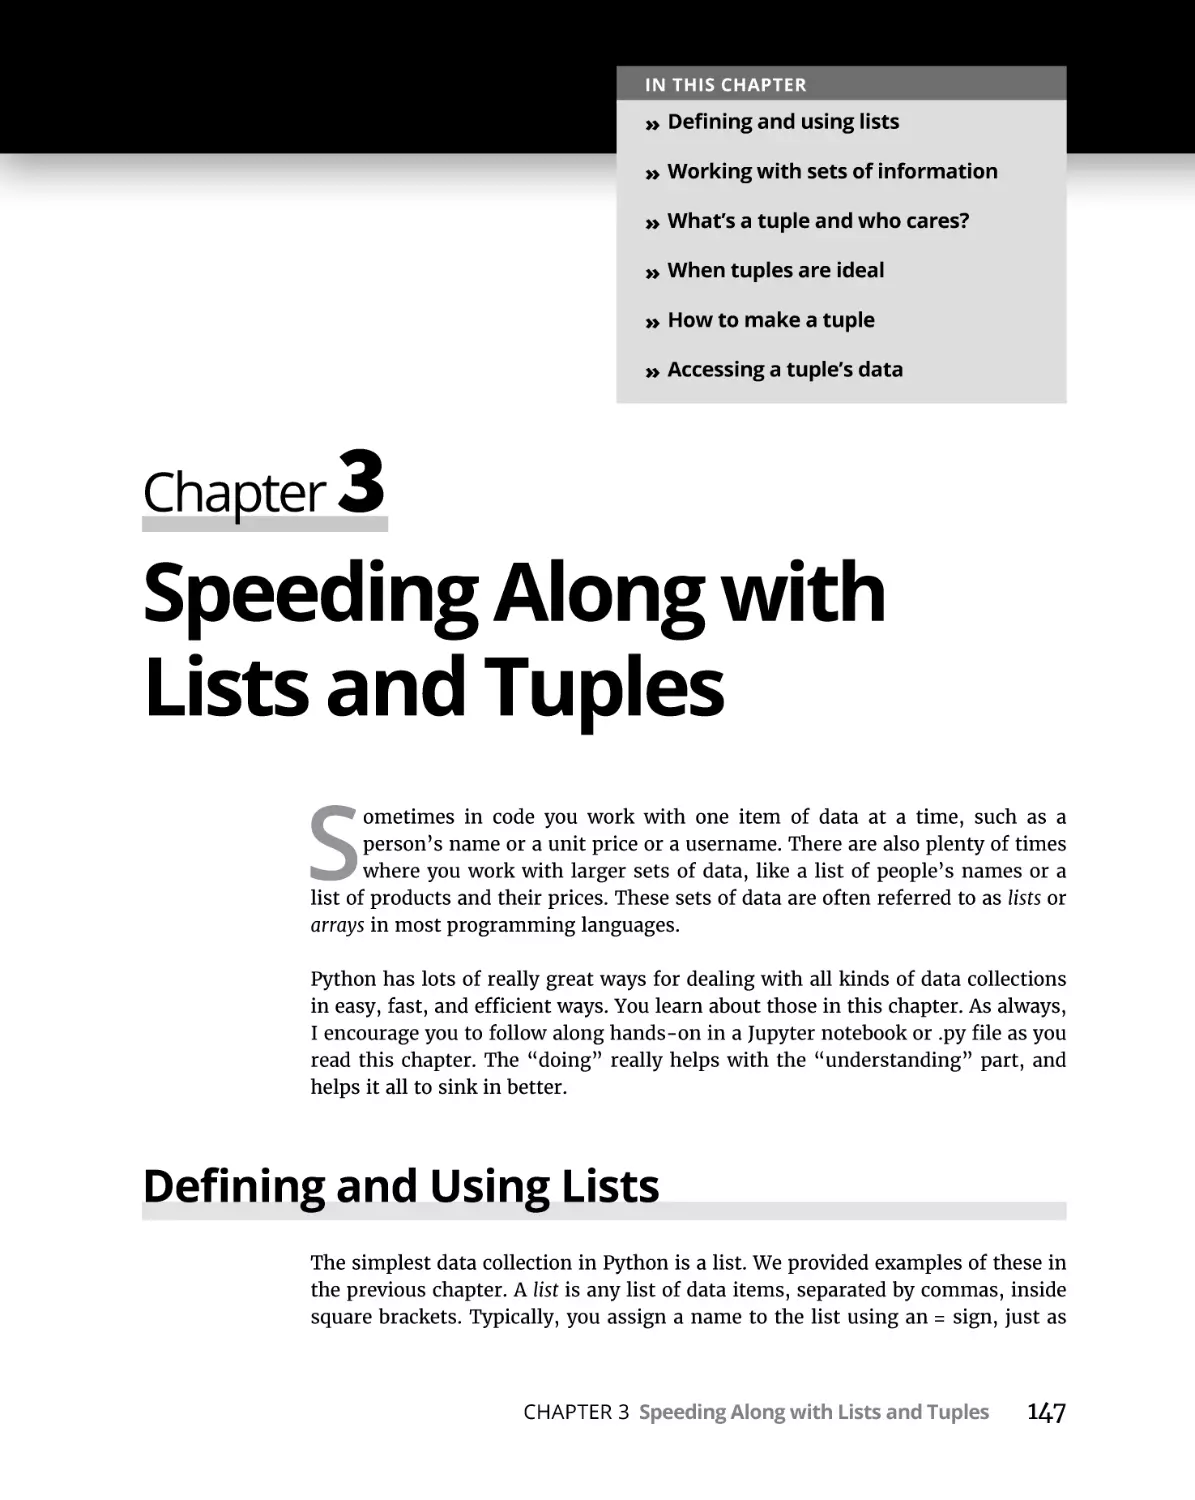 Chapter 3 Speeding Along with Lists and Tuples
Defining and Using Lists